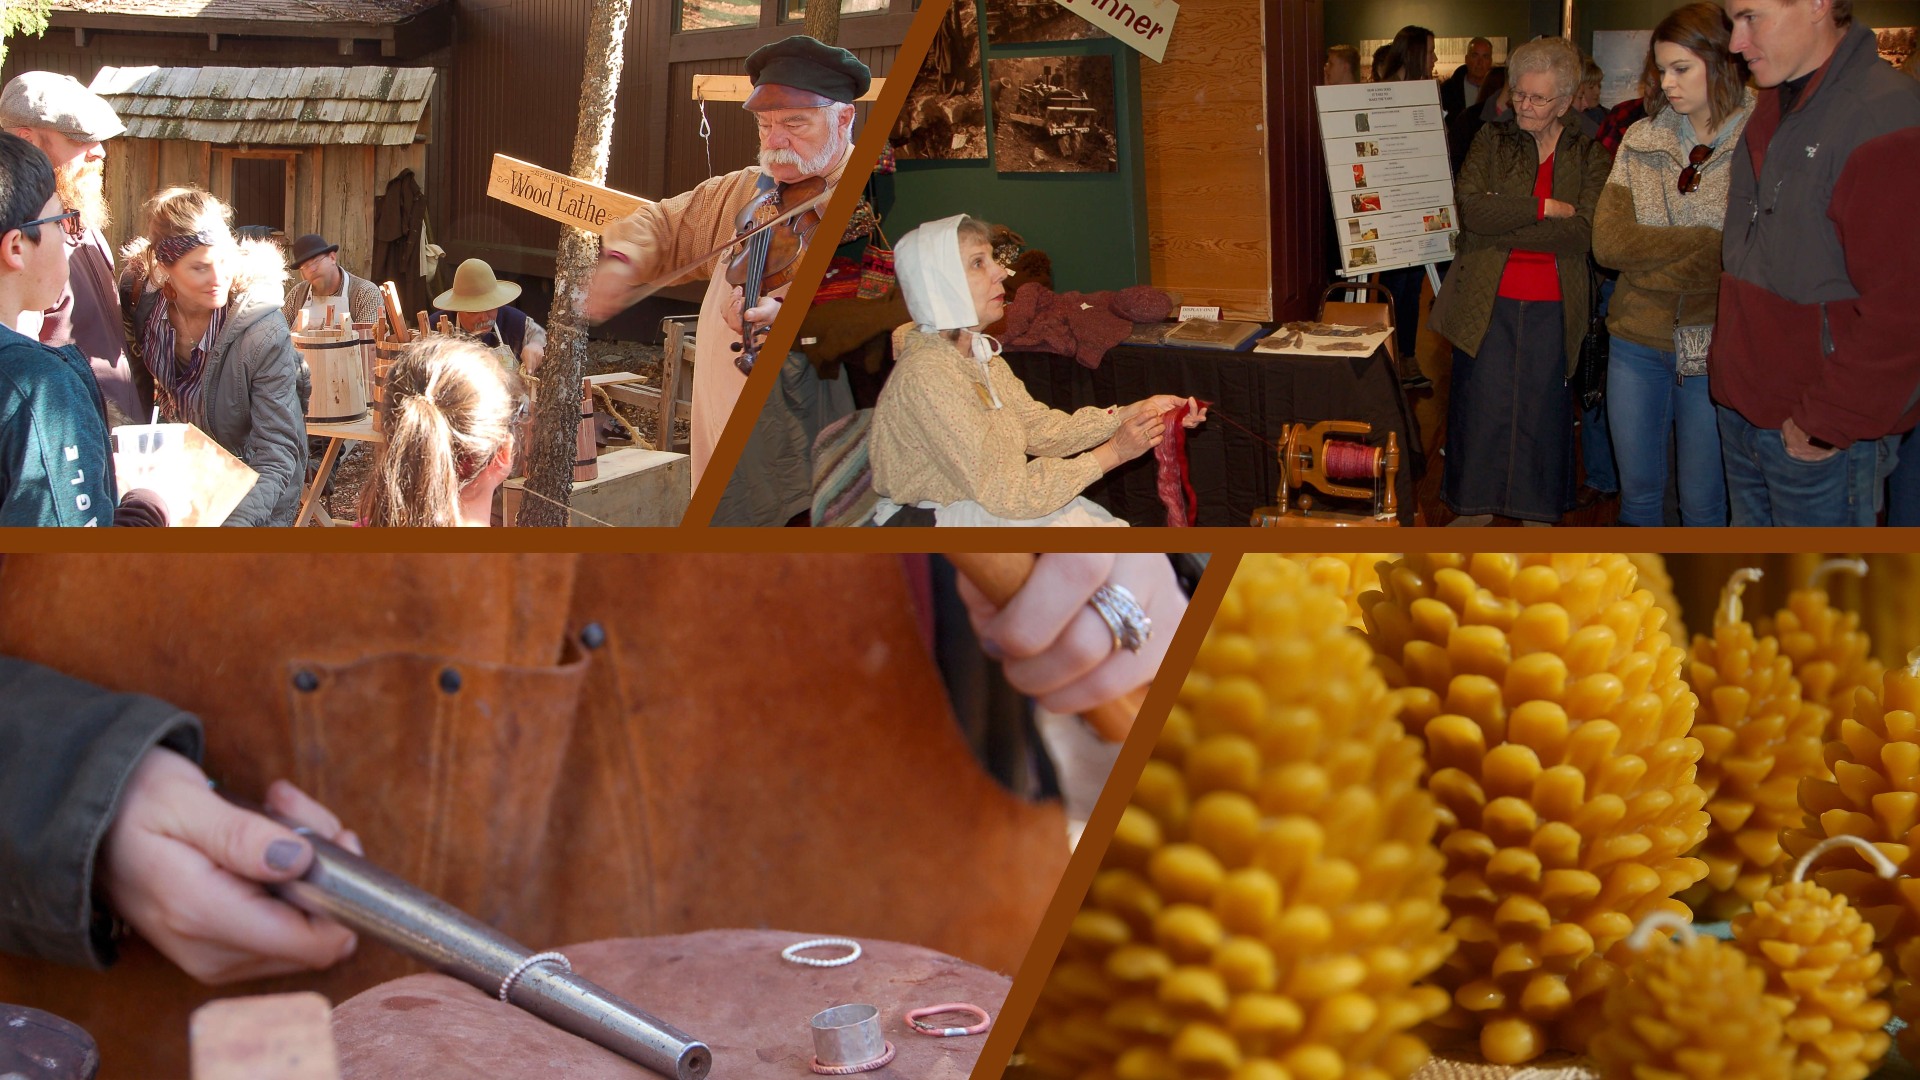 Collage of 4 images - 1- gentleman playing fiddle to audience, 2 - lady spinning yarn, 3- silversmith making jewelry, 4- homemade bees wax candles.